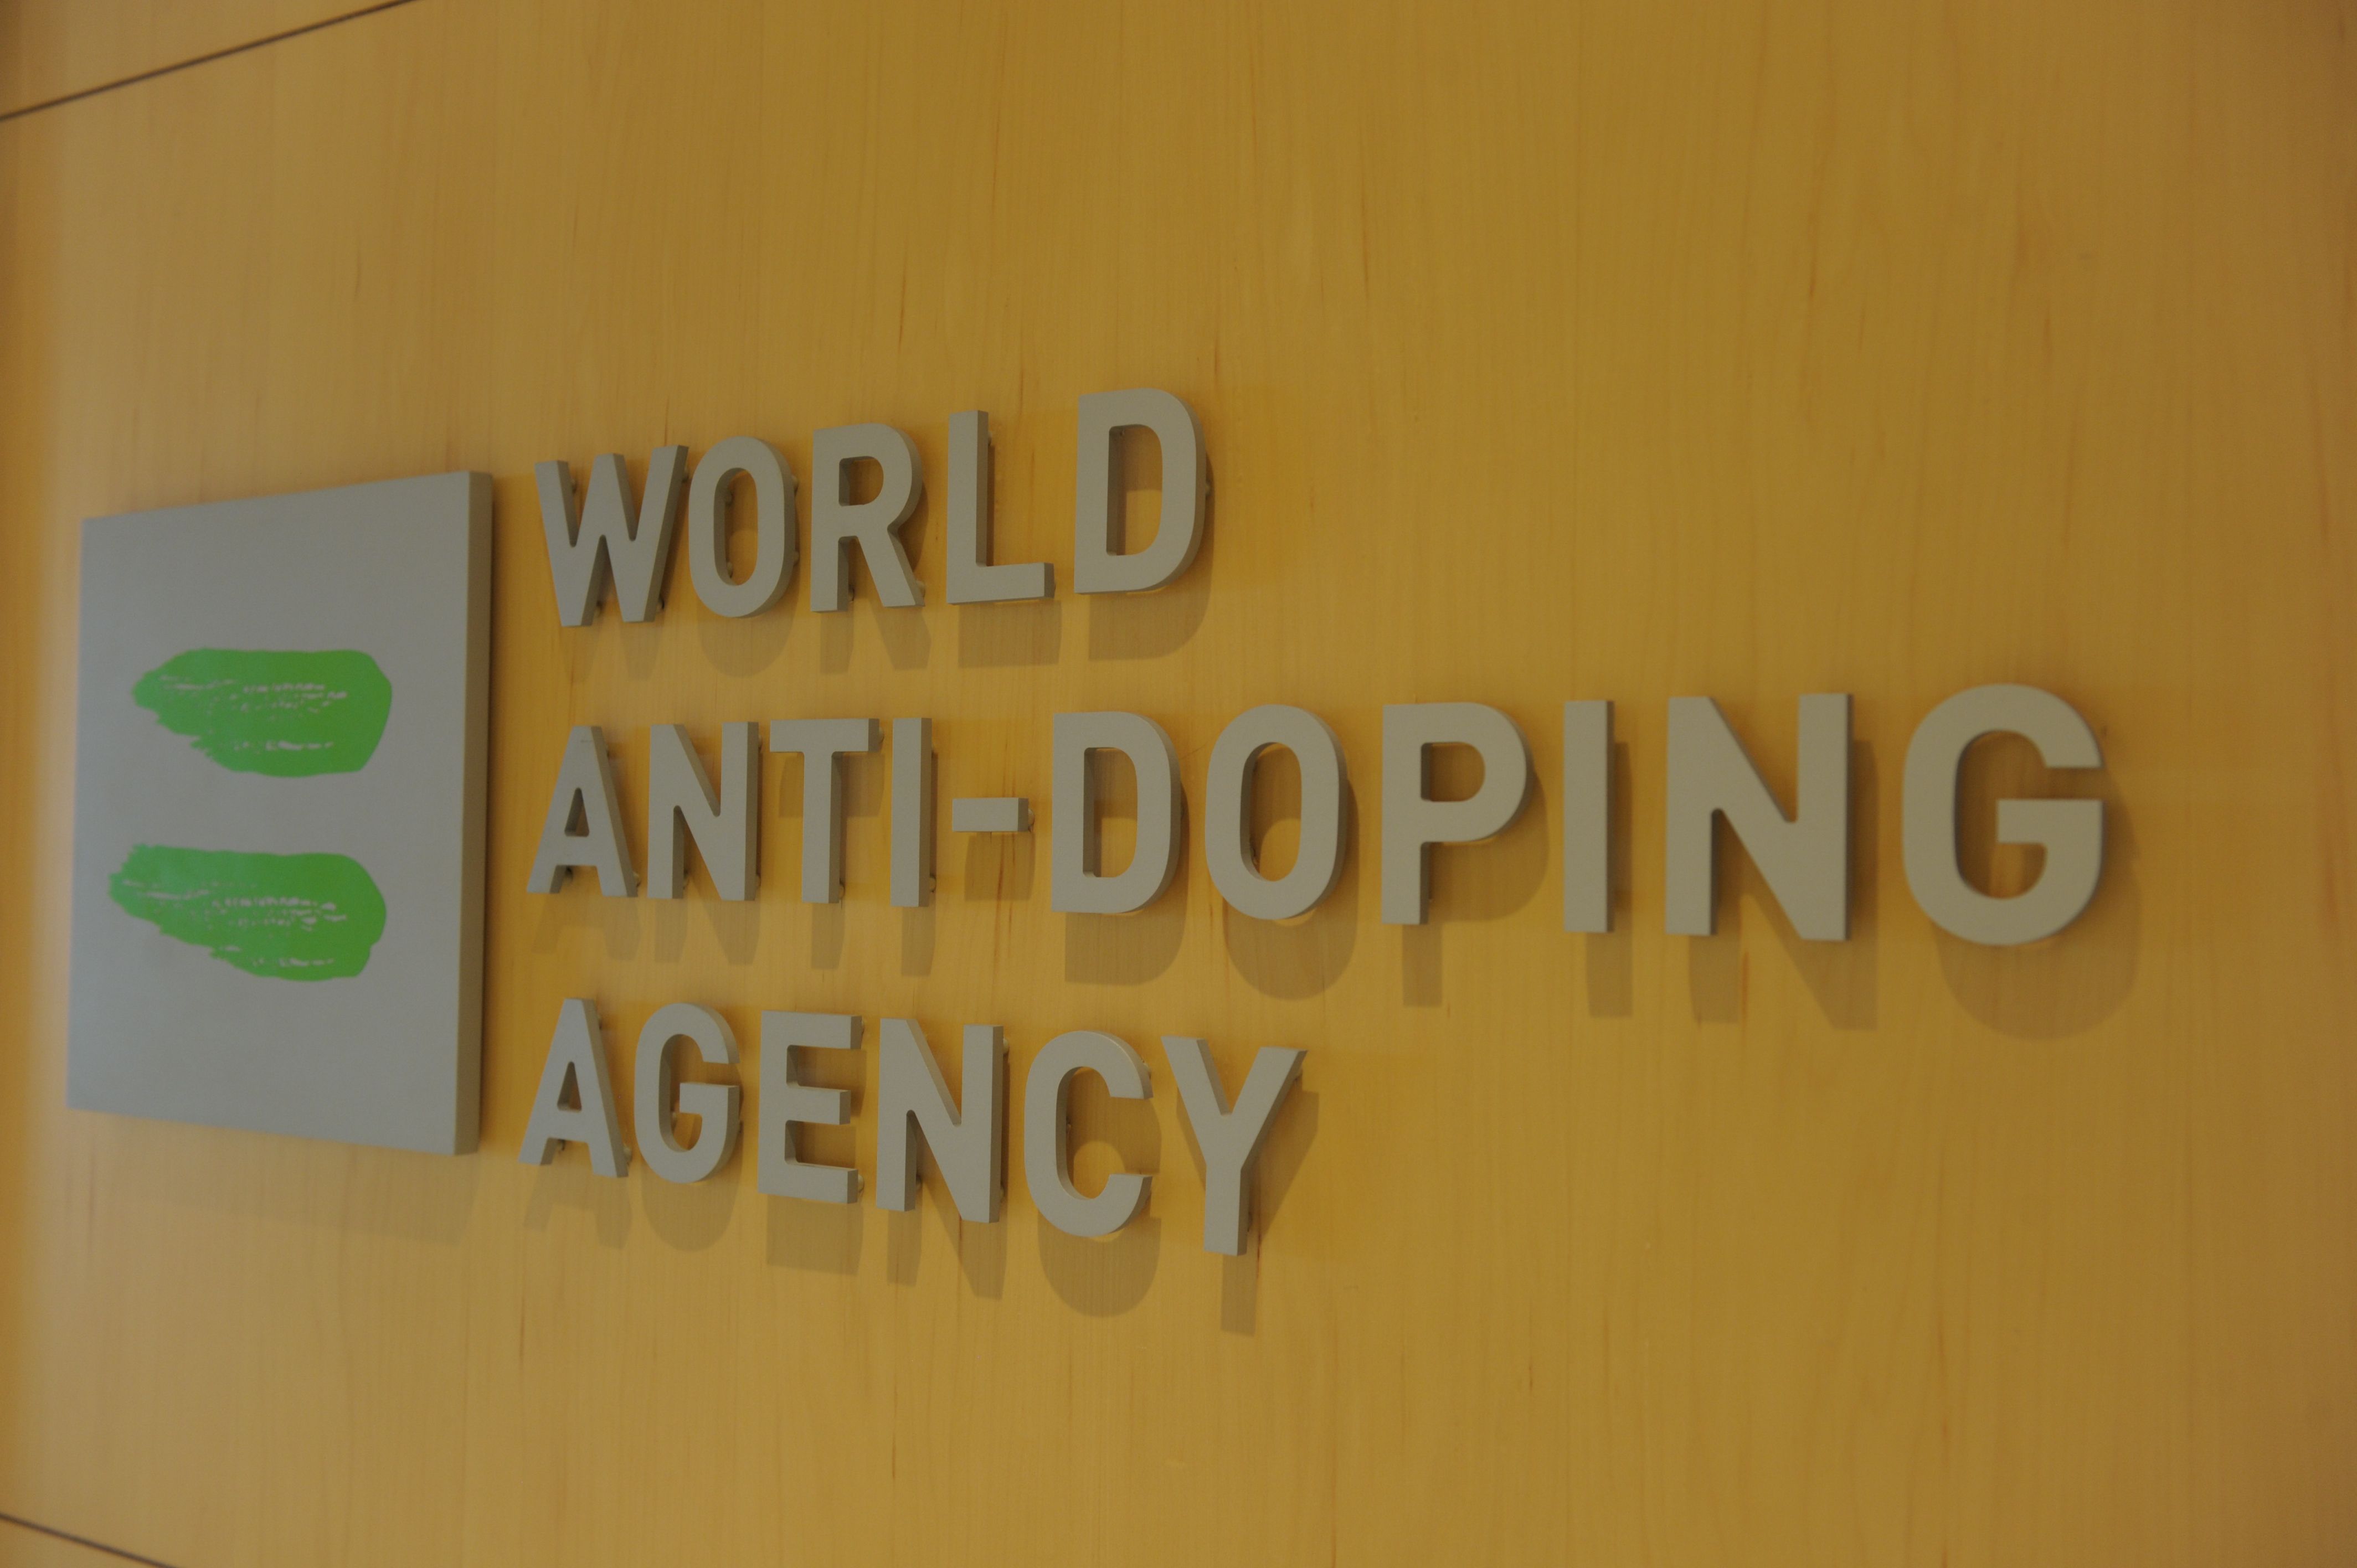 File photo of the World Anti-Doping Agency headquarters in Montreal.